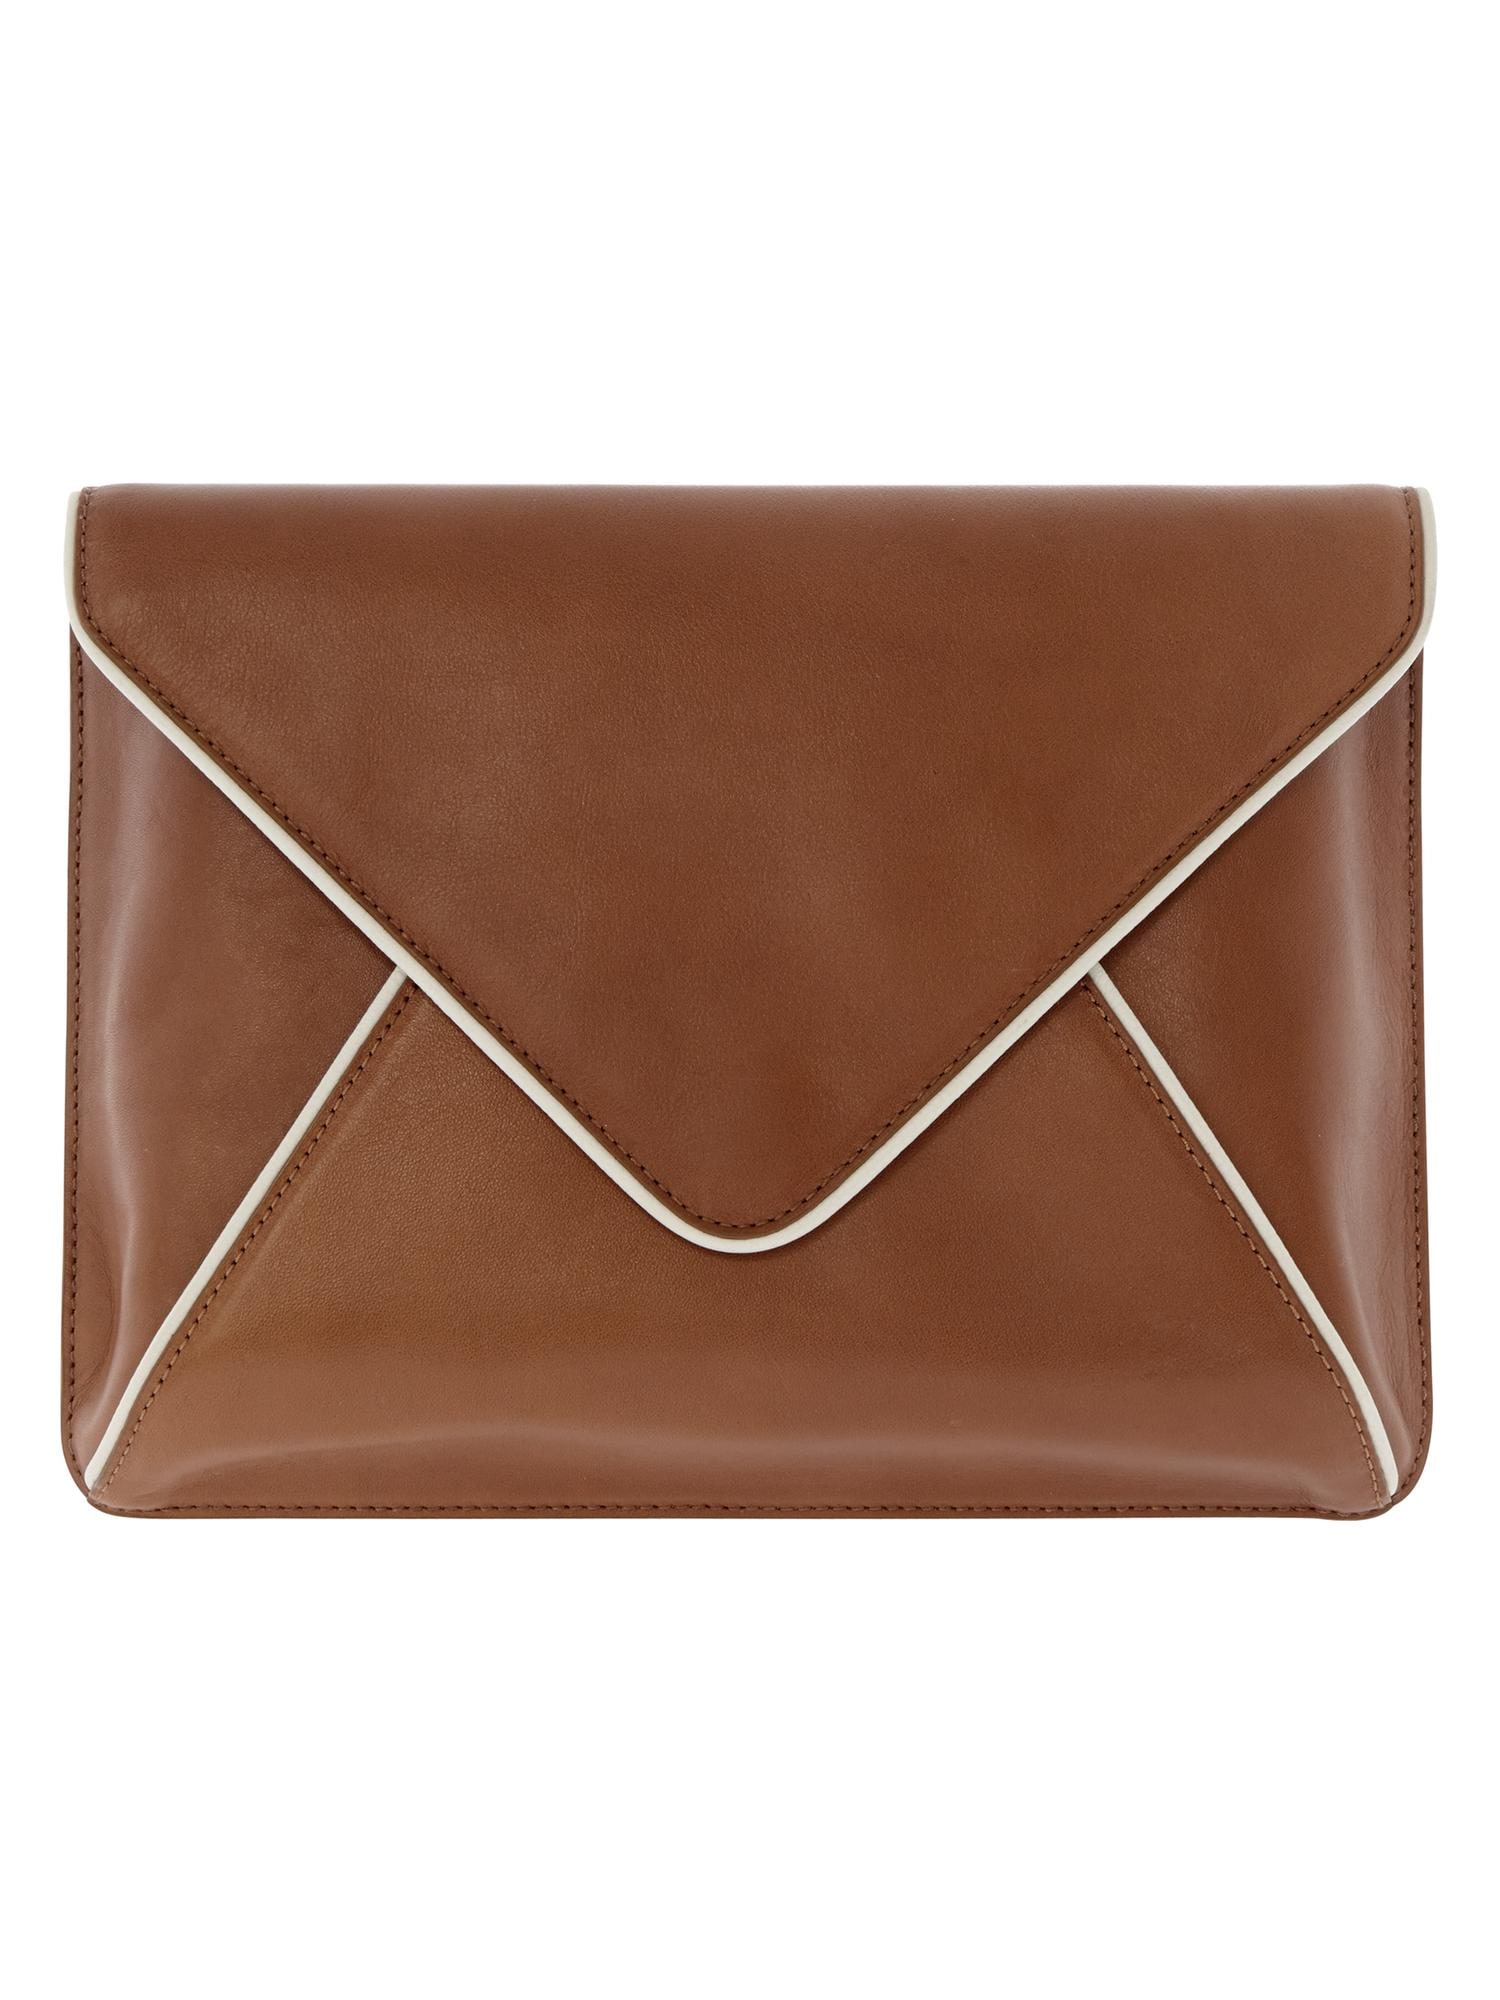 Issa Collection Envelope Clutch